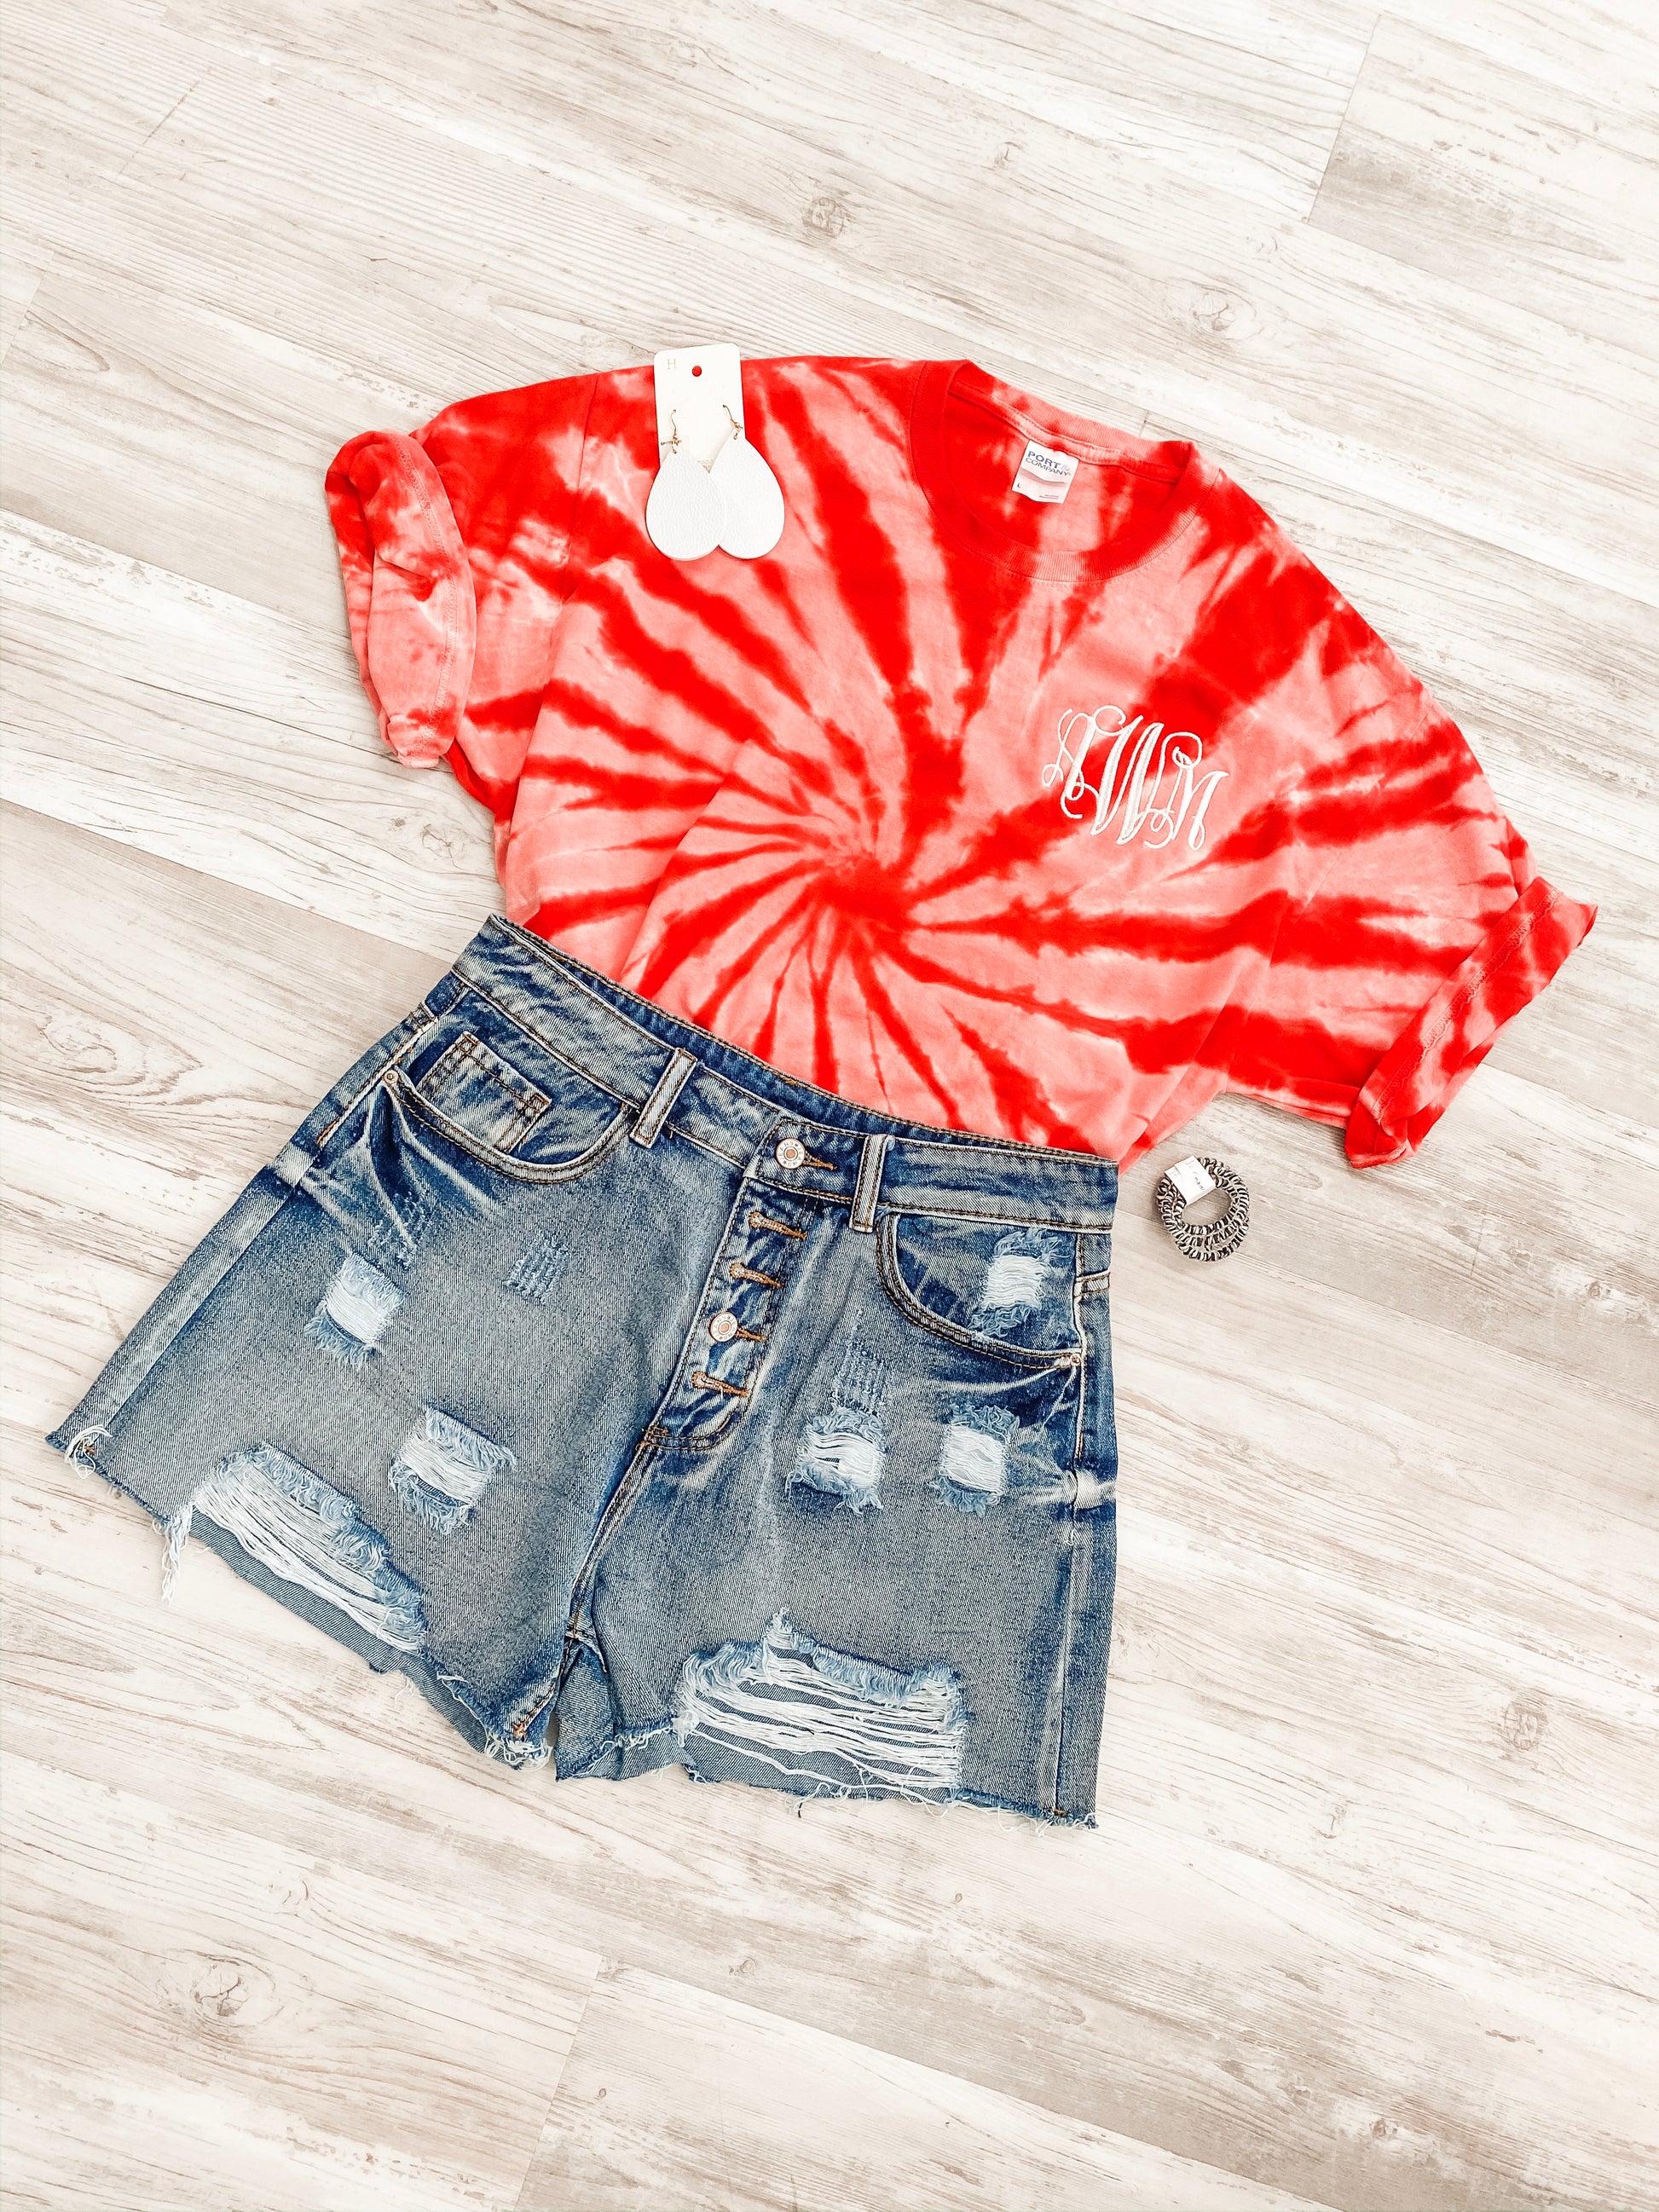 Monogrammed Tie Dye Tee - Red - Southern Grace Creations